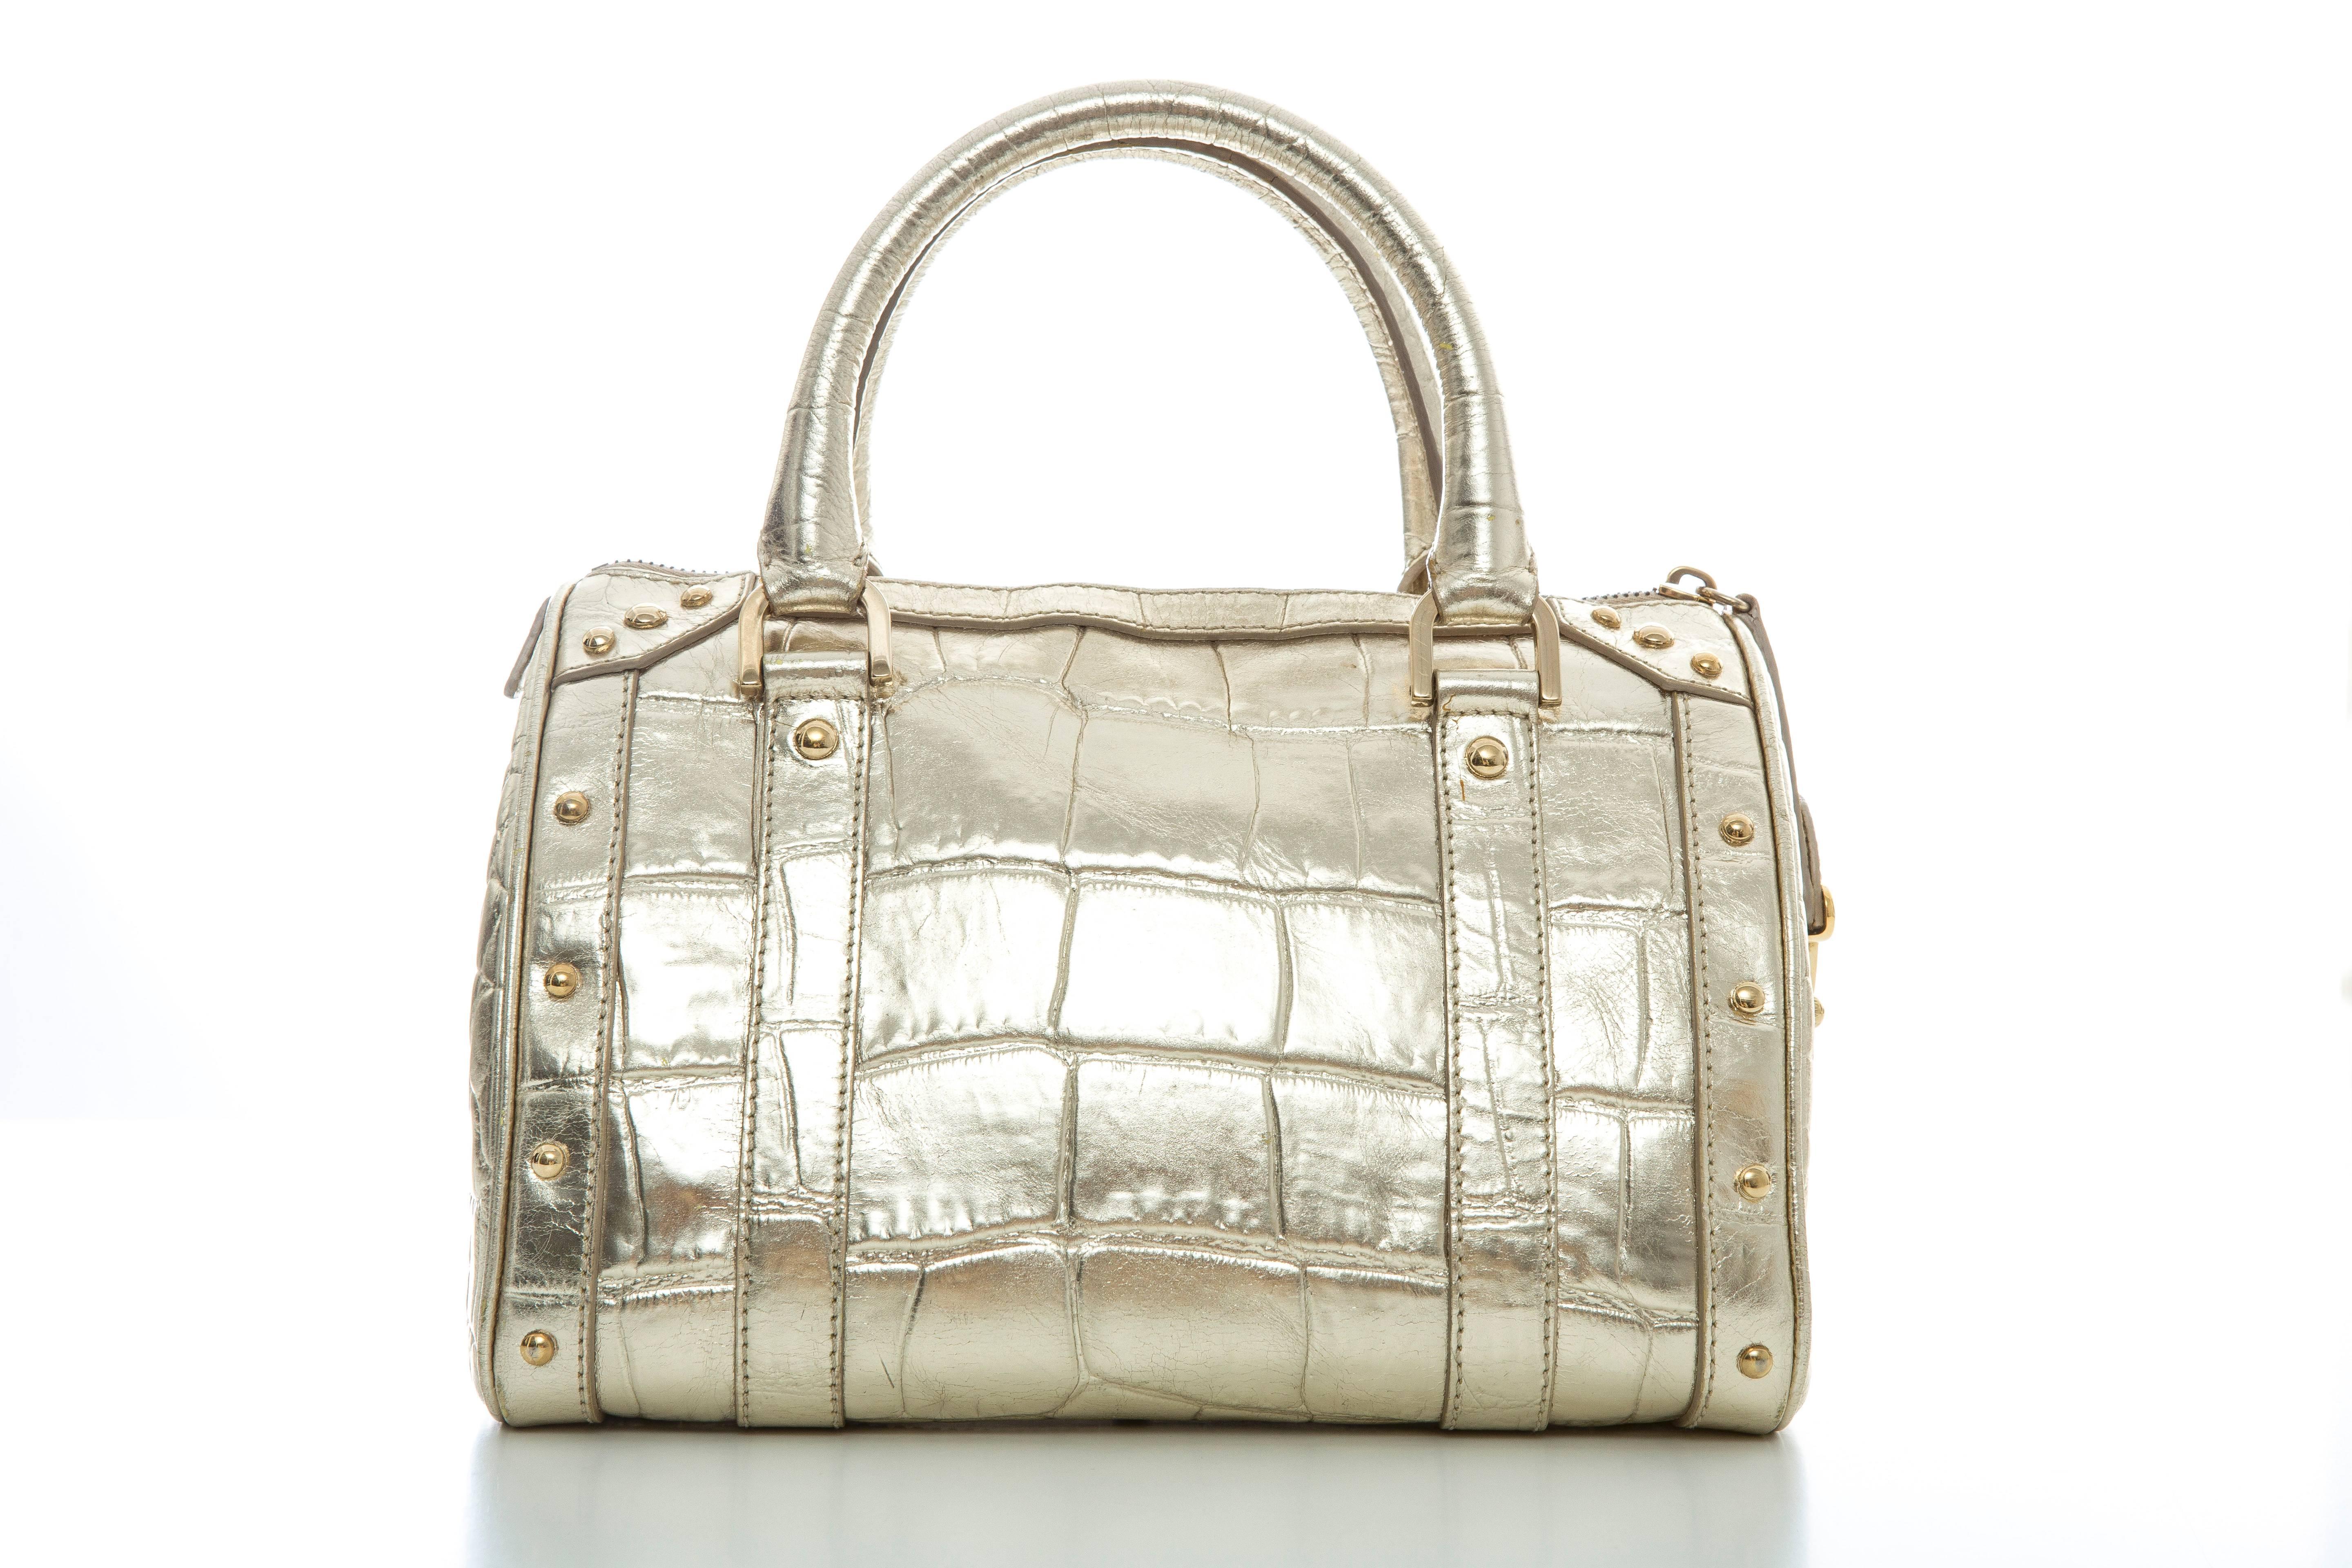 Versace Madonna embossed metallic gold leather top handle handbag with two interior pockets, one with zip, lock and key and fully lined is satin.